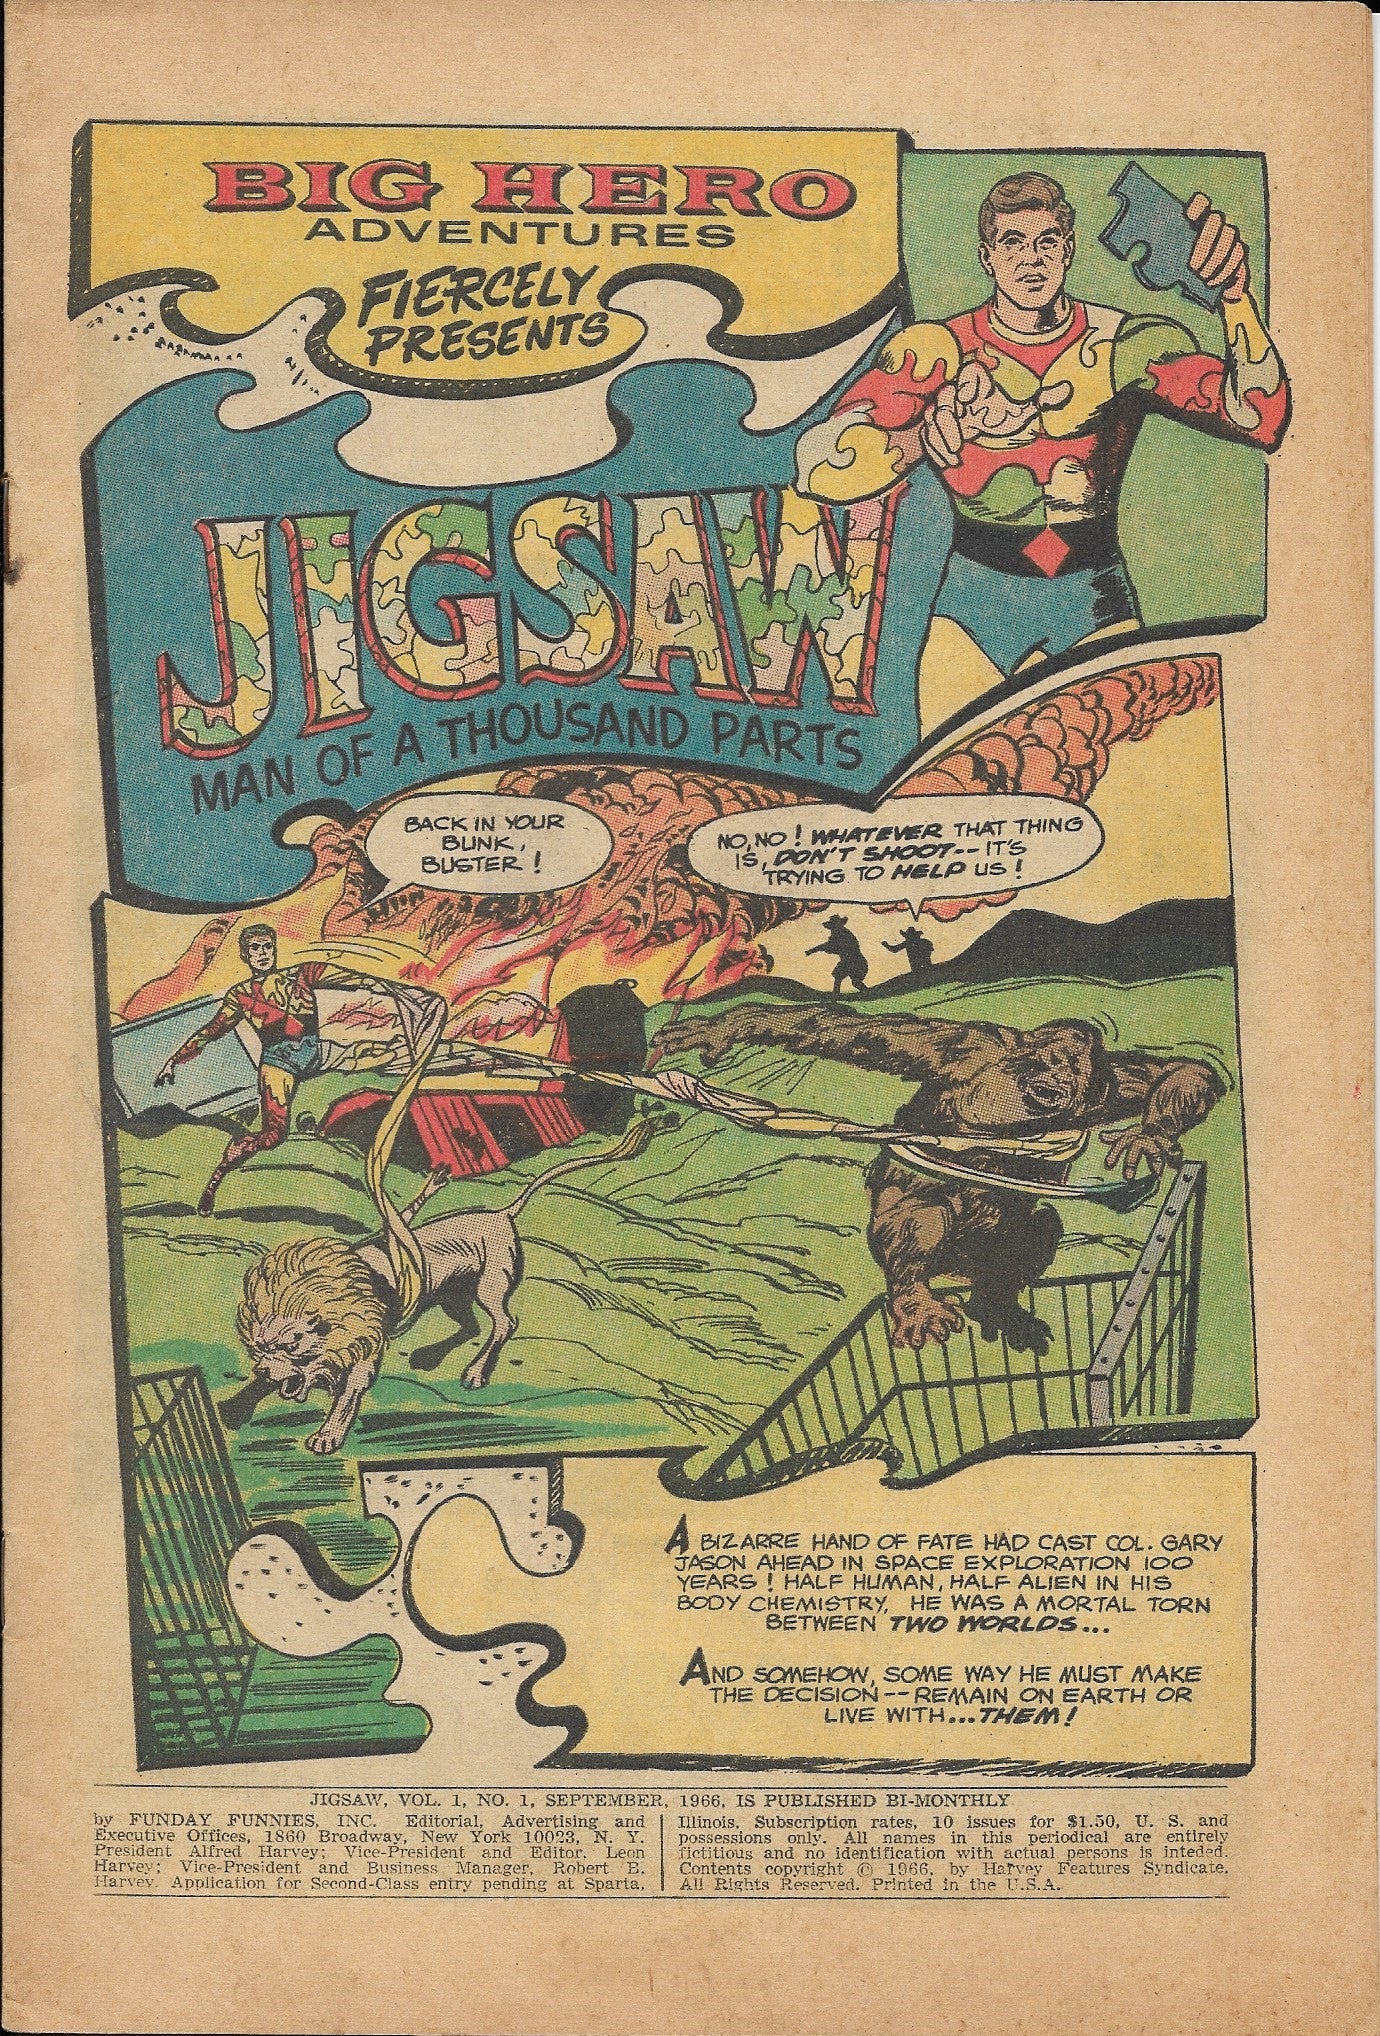 Jigsaw, Vol. 1, No. 1, Funday Funnies, Inc., September 1966, MISSING COVER